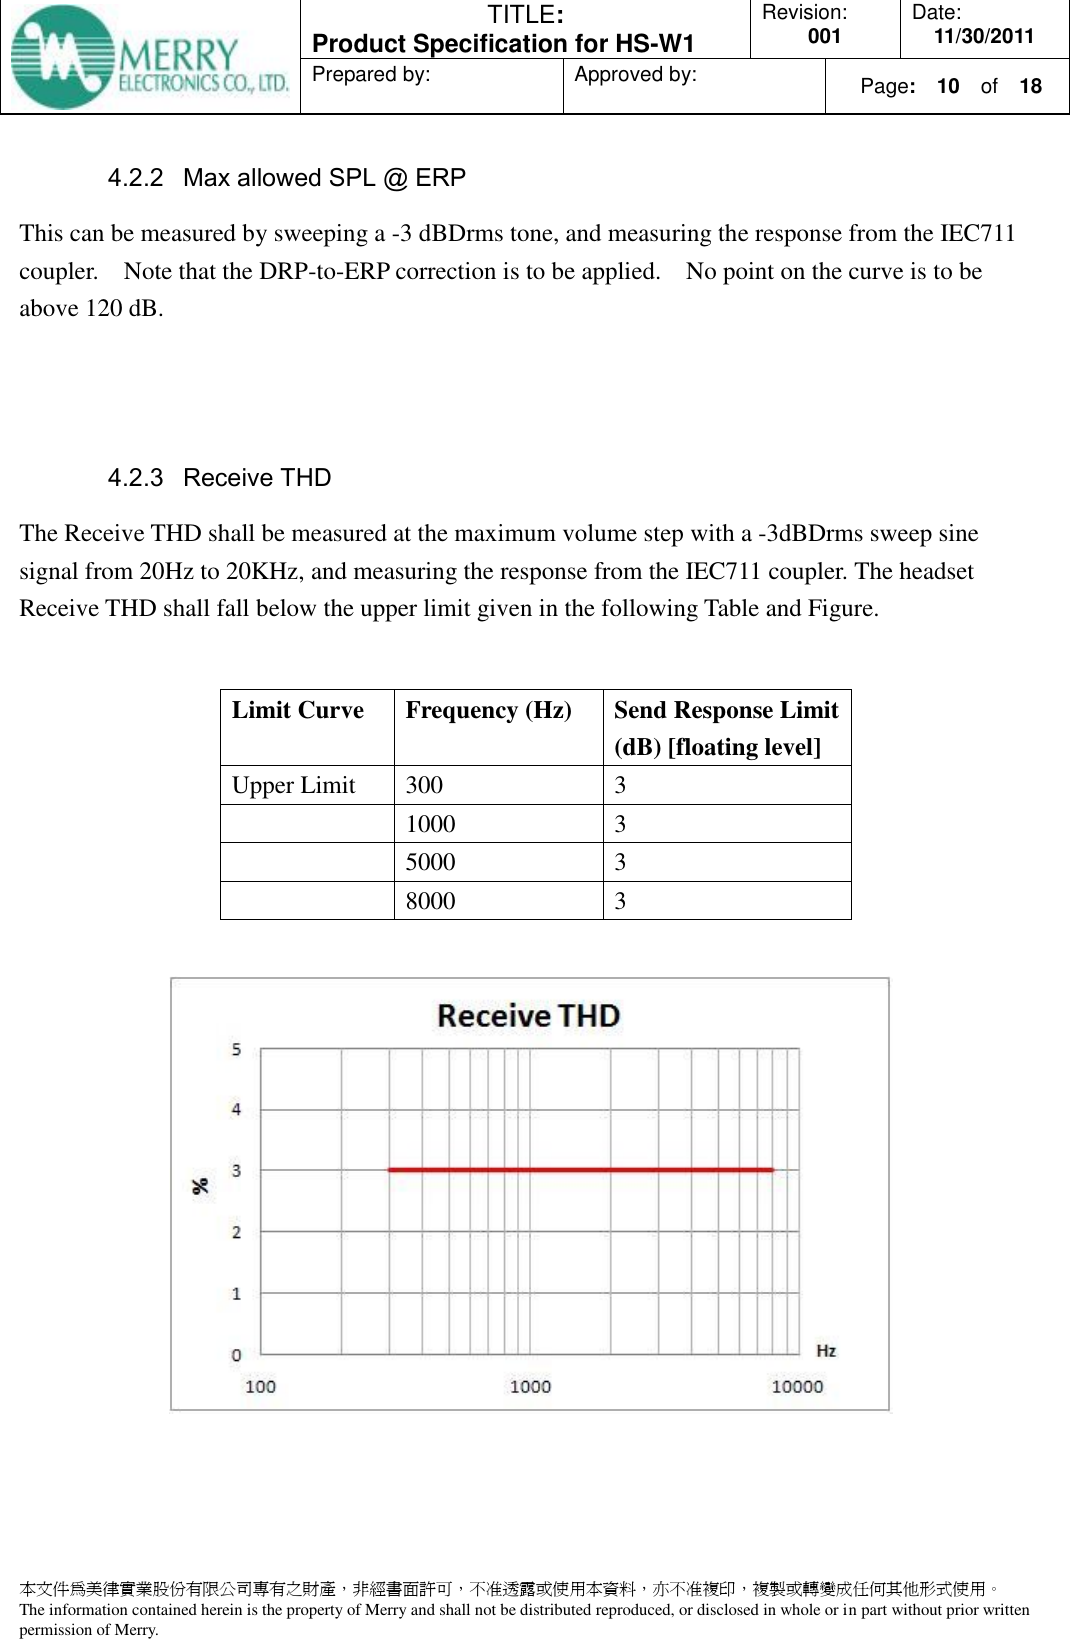  TITLE:  Product Specification for HS-W1 Revision: 001 Date: 11/30/2011 Prepared by:  Approved by:    Page:  10  of    18  本文件為美律實業股份有限公司專有之財產，非經書面許可，不准透露或使用本資料，亦不准複印，複製或轉變成任何其他形式使用。 The information contained herein is the property of Merry and shall not be distributed reproduced, or disclosed in whole or in part without prior written permission of Merry.  4.2.2 Max allowed SPL @ ERP This can be measured by sweeping a -3 dBDrms tone, and measuring the response from the IEC711 coupler.    Note that the DRP-to-ERP correction is to be applied.    No point on the curve is to be above 120 dB.     4.2.3 Receive THD The Receive THD shall be measured at the maximum volume step with a -3dBDrms sweep sine signal from 20Hz to 20KHz, and measuring the response from the IEC711 coupler. The headset Receive THD shall fall below the upper limit given in the following Table and Figure.  Limit Curve Frequency (Hz) Send Response Limit (dB) [floating level] Upper Limit 300 3  1000 3  5000 3  8000 3     